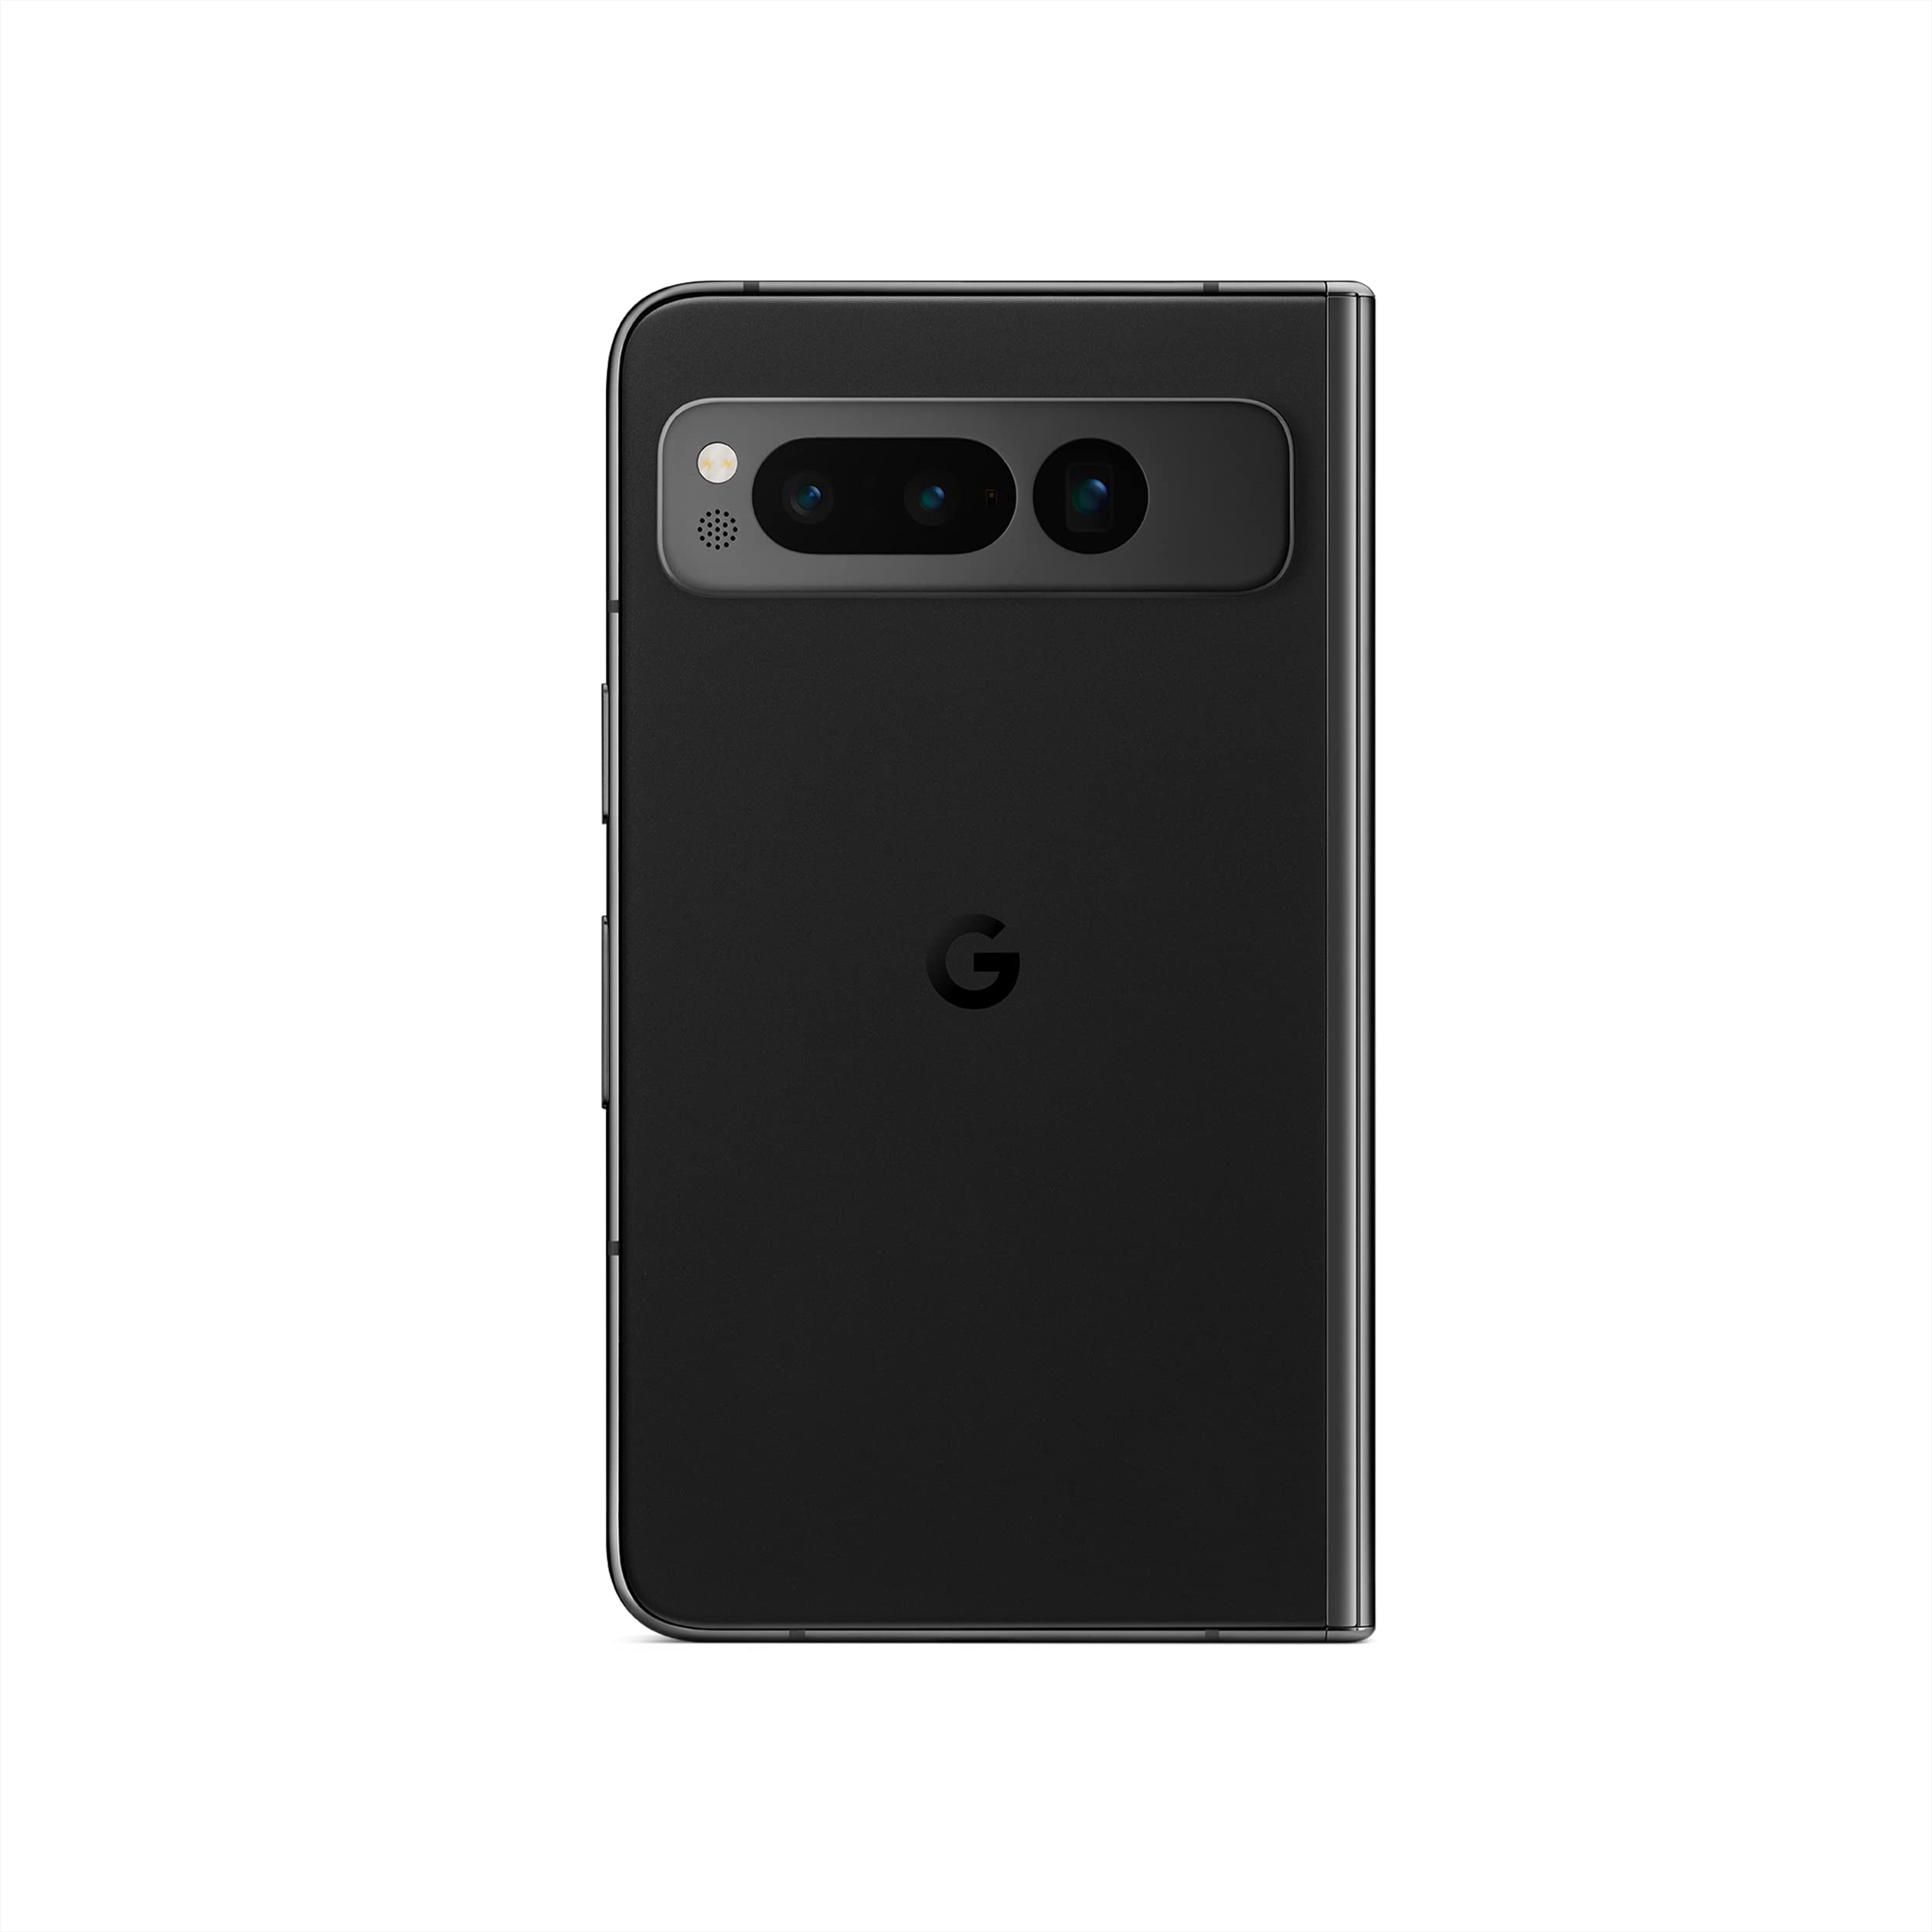 Google Pixel Fold - Unlocked Android 5G Smartphone with Telephoto Lens and Ultrawide Lens - Foldable Display - 24-Hour Battery - Obsidian - 256 GB